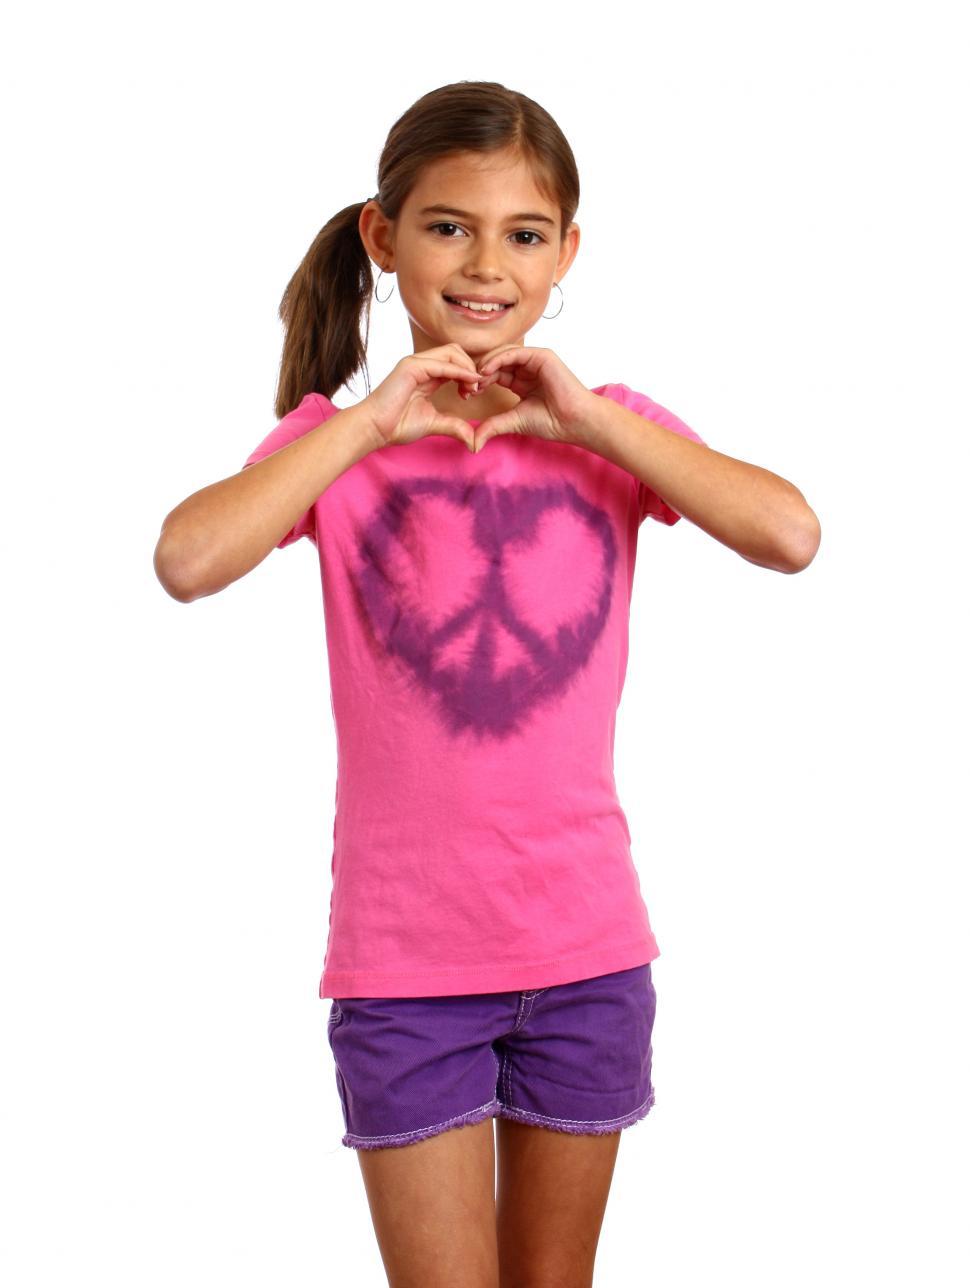 Free Image of A cute young girl making a heart symbol 